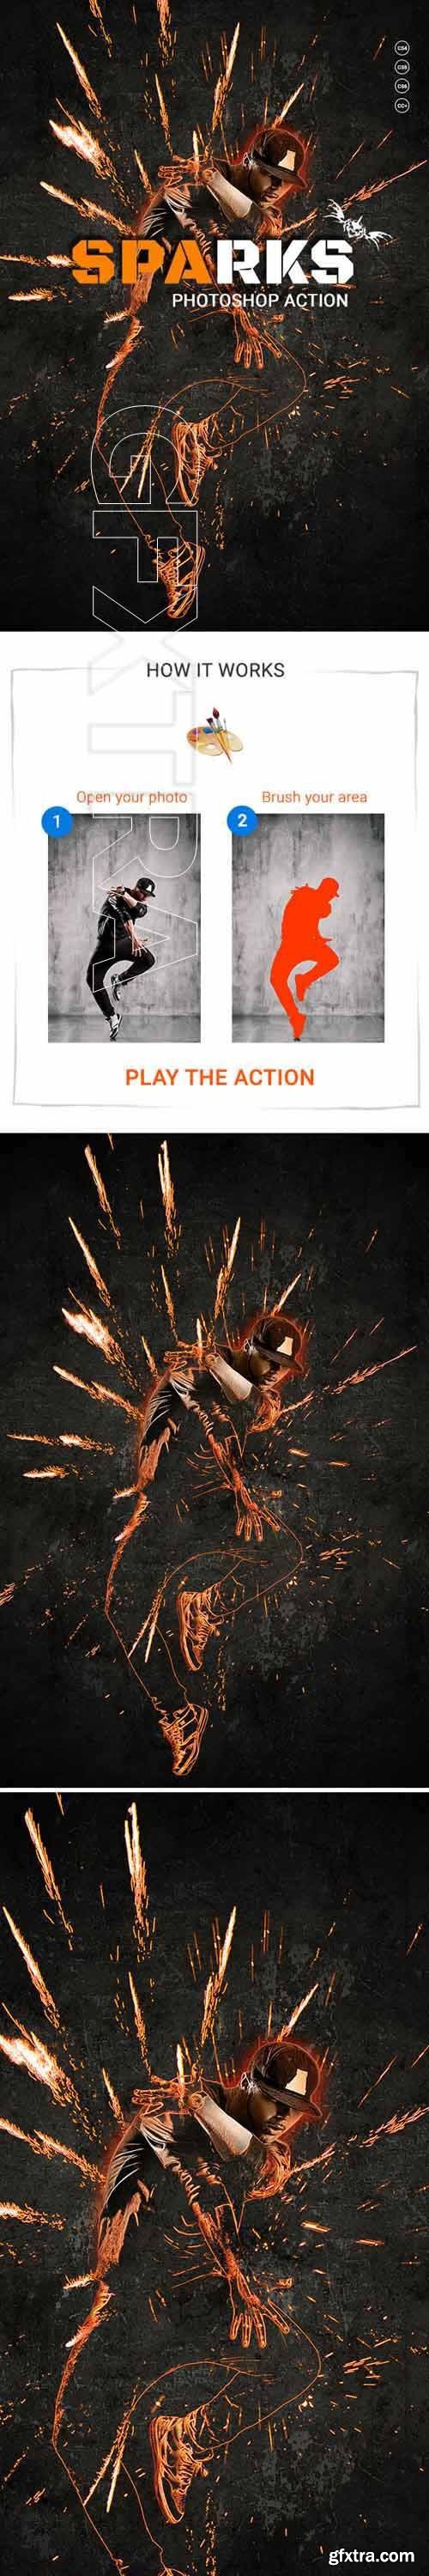 GraphicRiver - Sparks Photoshop Action 20627467